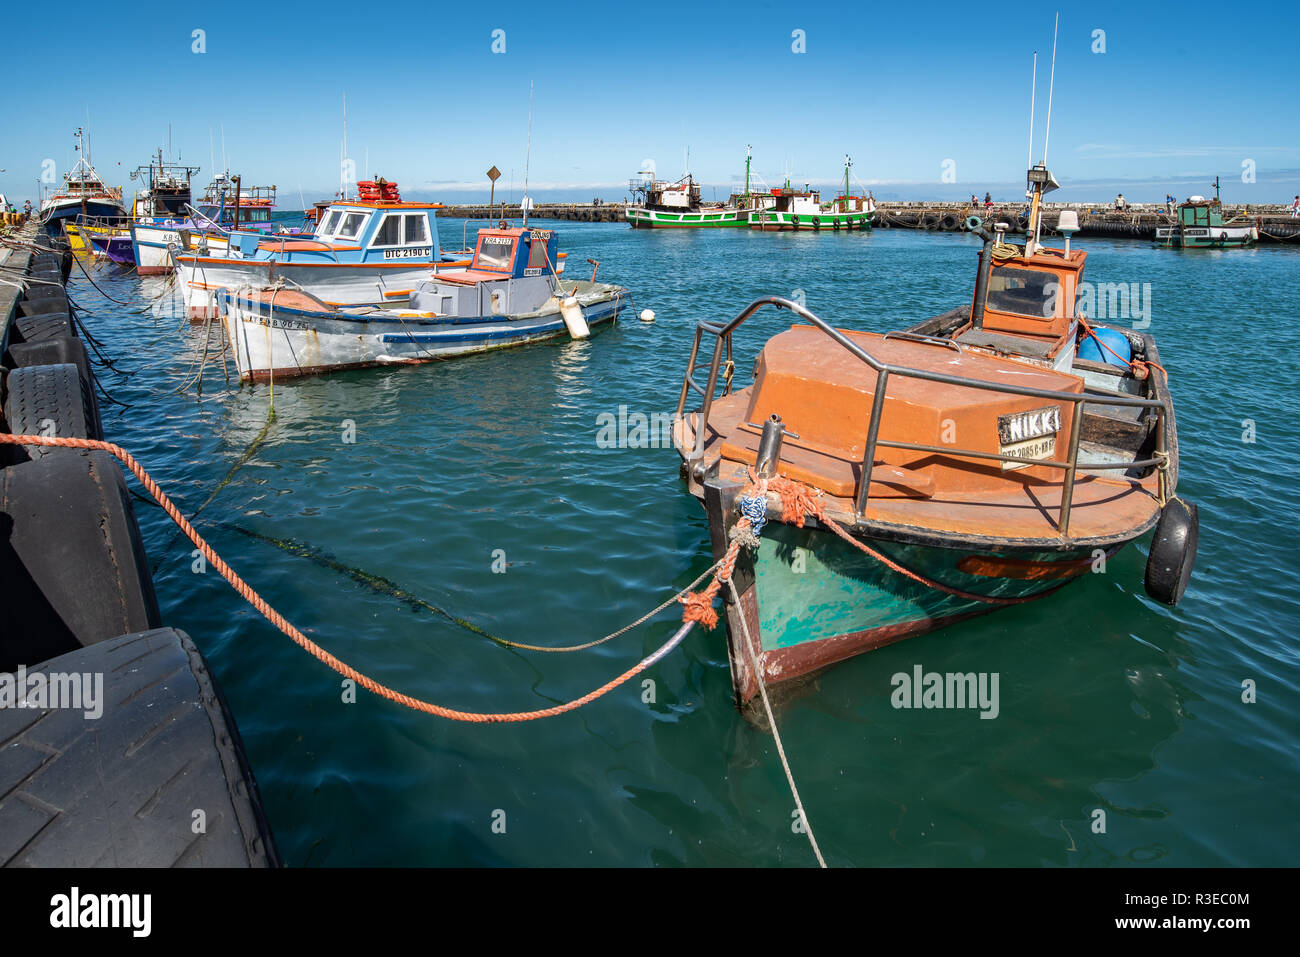 Colourful boats in the harbour of Kalk Bay, Cape Town, South Africa Stock Photo